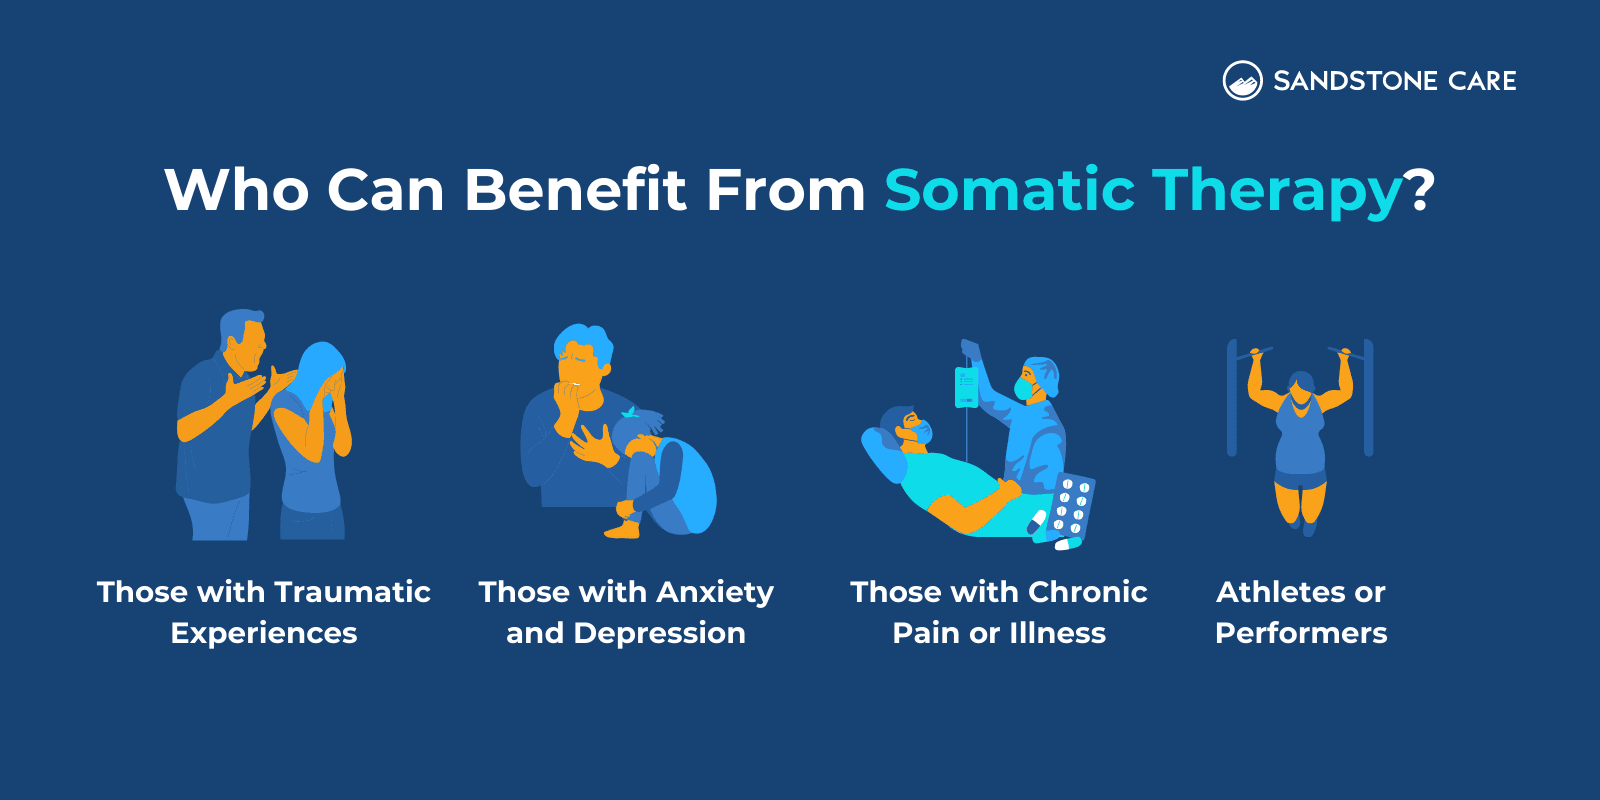 Who Can Benefit From Somatic Therapy